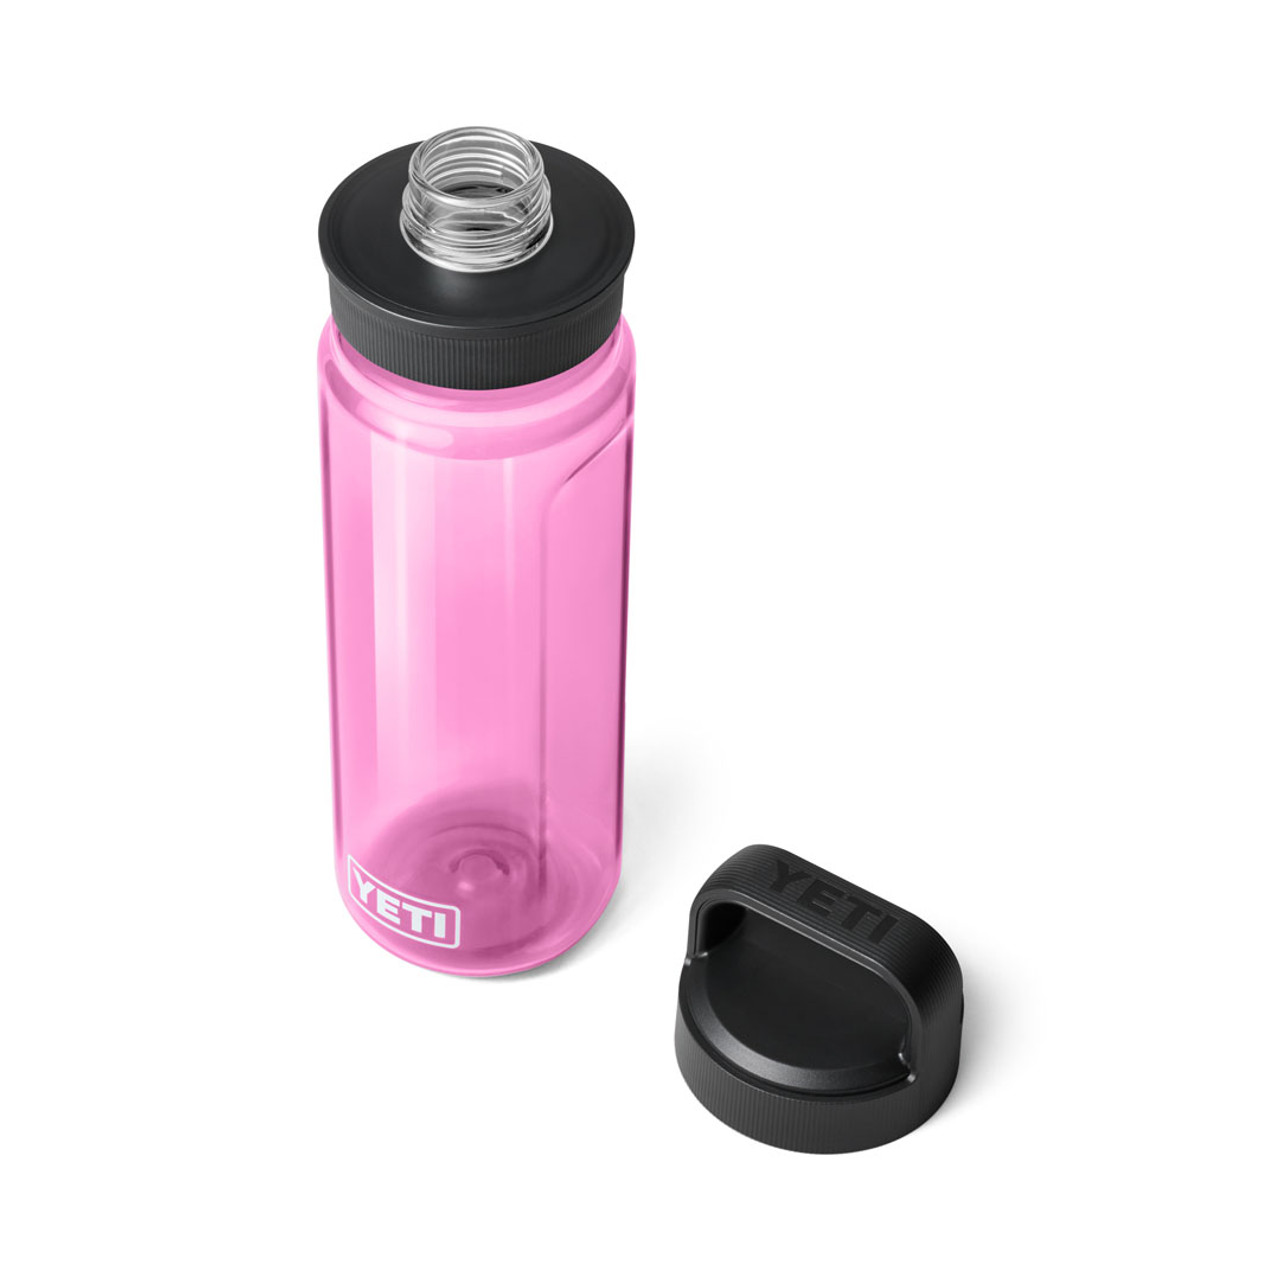 https://cdn11.bigcommerce.com/s-ppsyskcavg/images/stencil/1280x1280/products/68674/248131/YETI_Wholesale_Drinkware_Yonder_750mL_Power_Pink_3qtr_Cap_Off_0878_B_2400x2400__03648.1694634941.jpg?c=2?imbypass=on